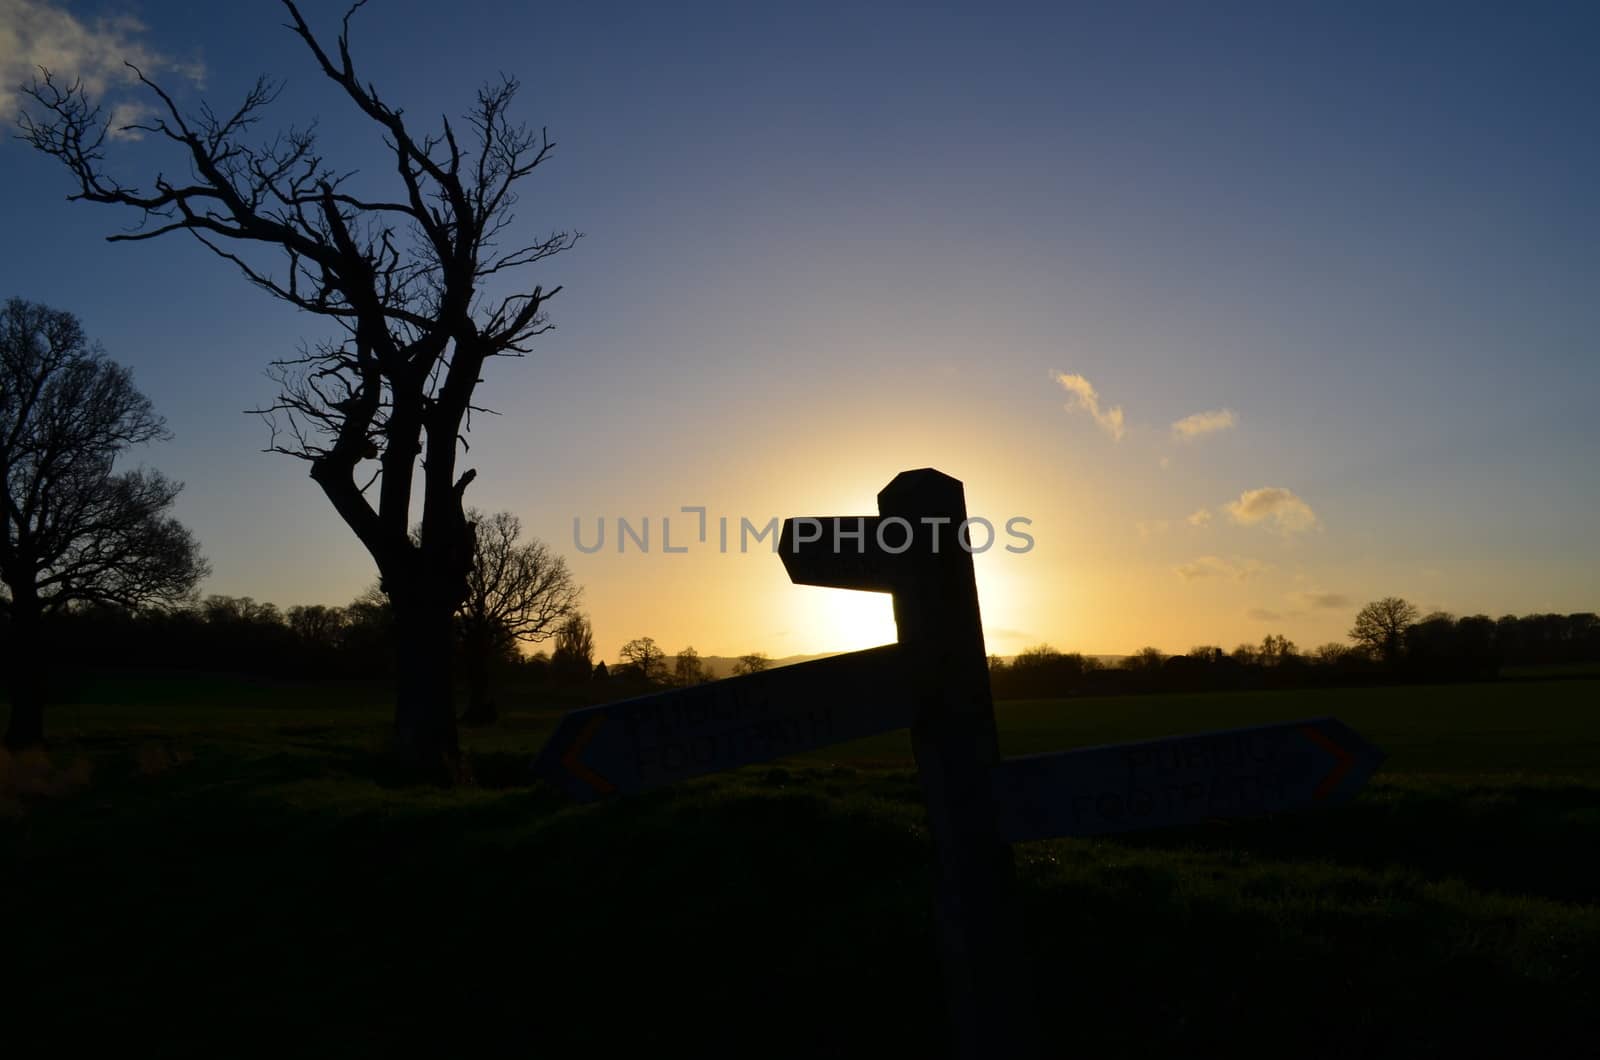 The sun sets over open countryside in England with a public footpath signpost pointing the way for ramblers.